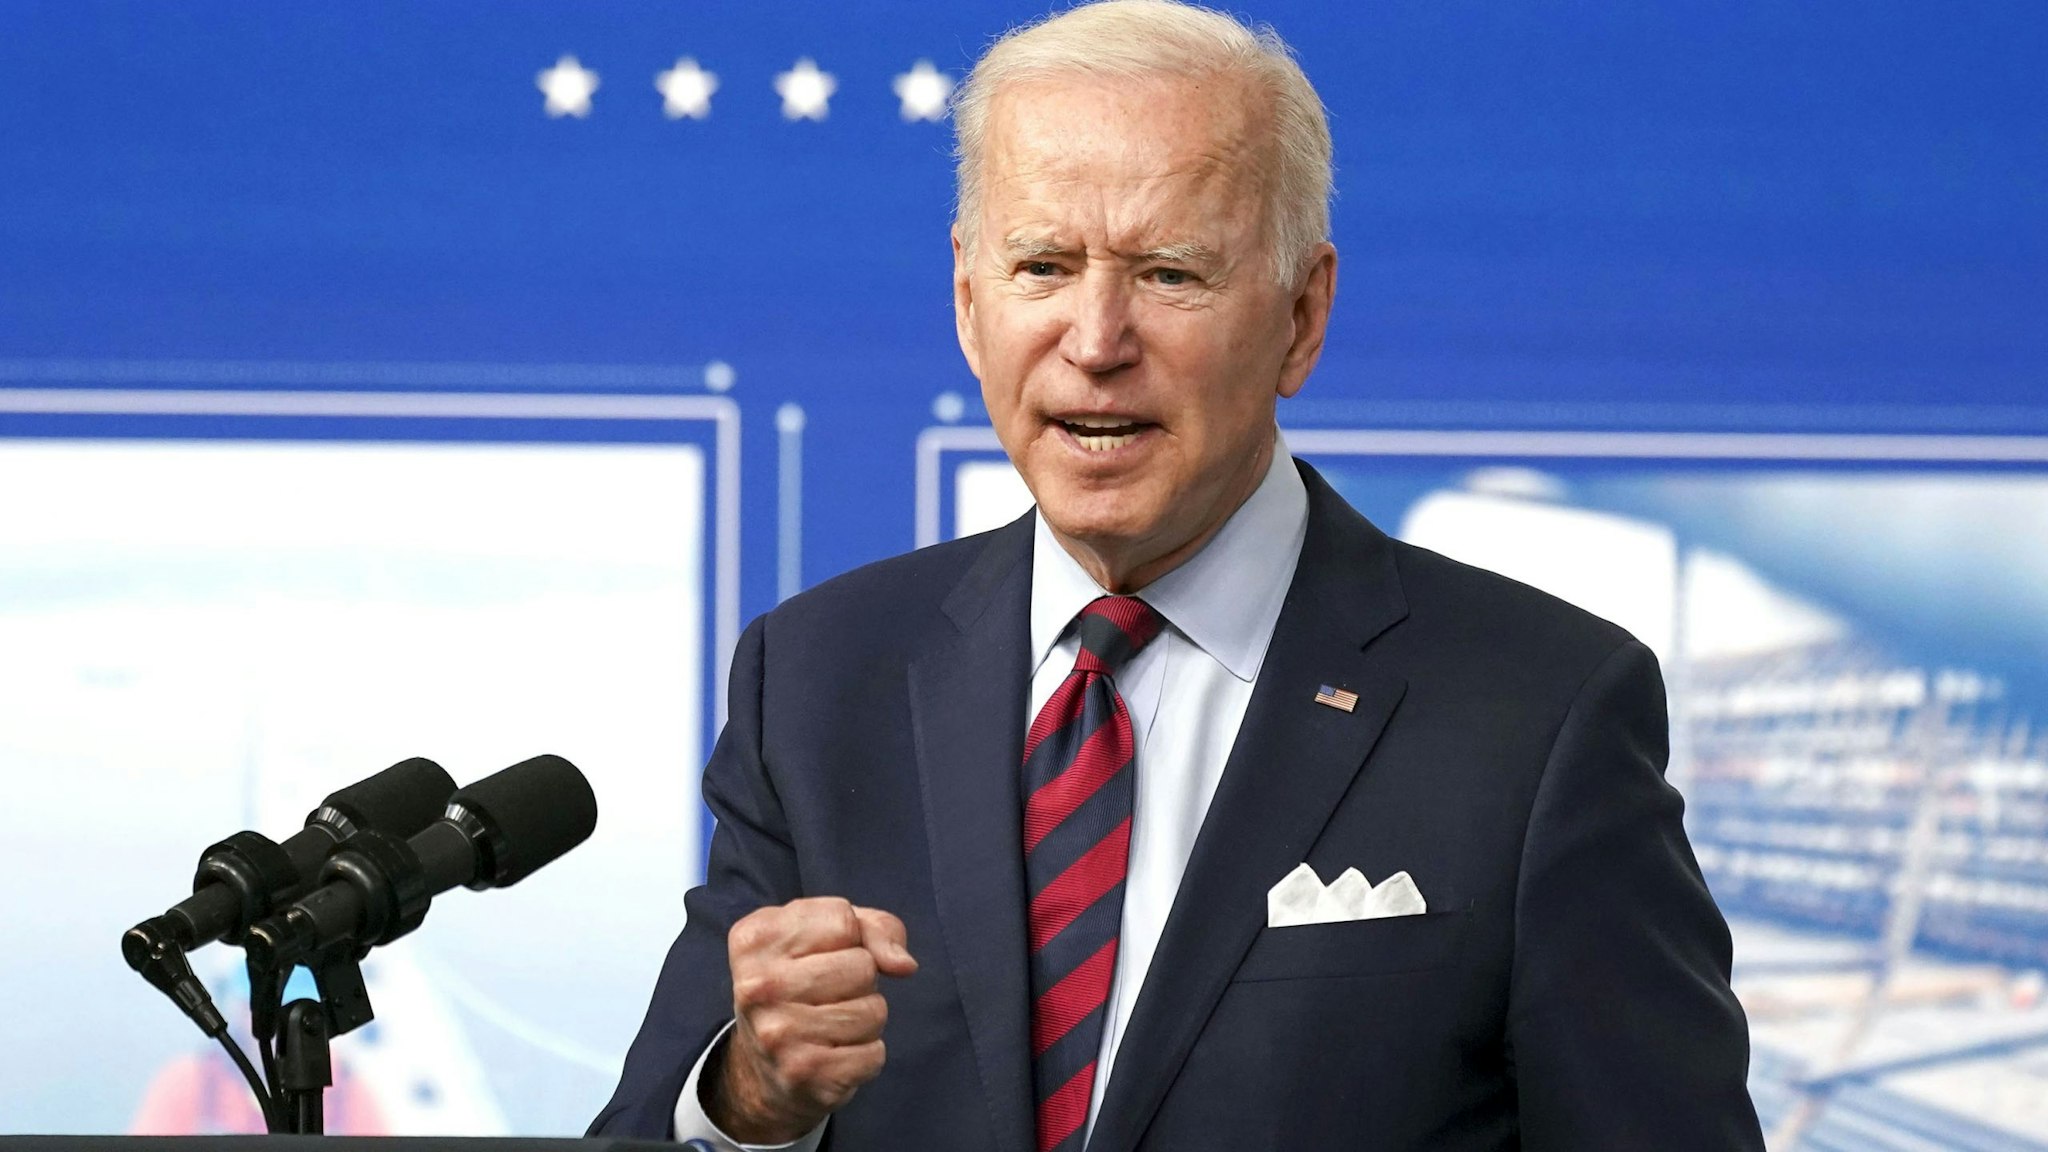 U.S. President Joe Biden speaks in the Eisenhower Executive Office Building in Washington, D.C., U.S., on Wednesday, April 7, 2021. Biden promoted his $2.25 trillion infrastructure plan and described its passage as urgent to keep the U.S. competitive against China.